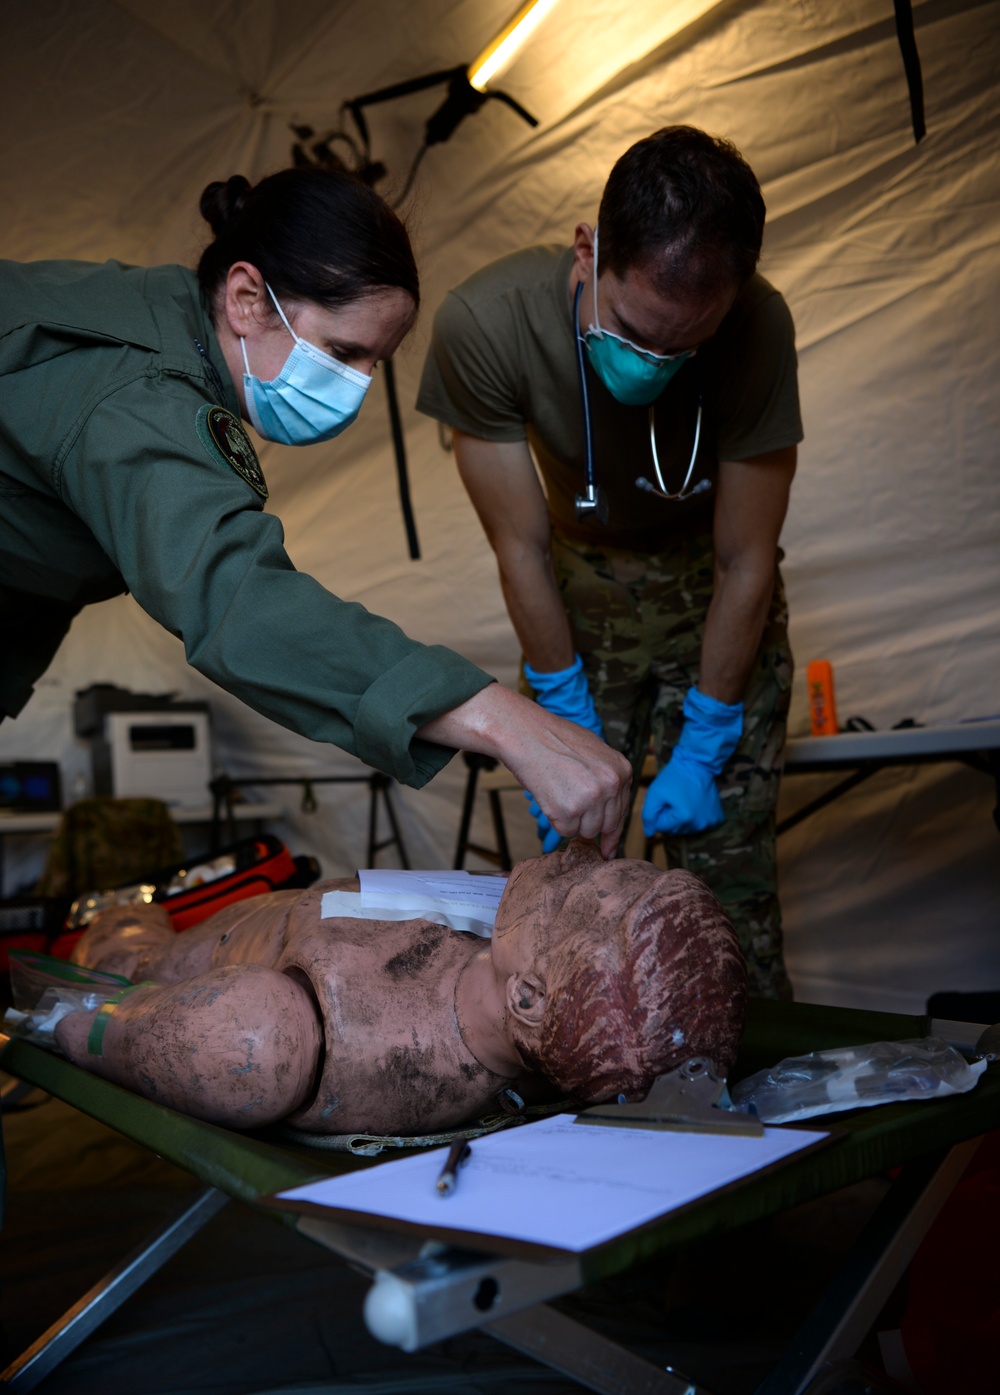 Pacific nations hone HA/DR capabilities at Cope North 21